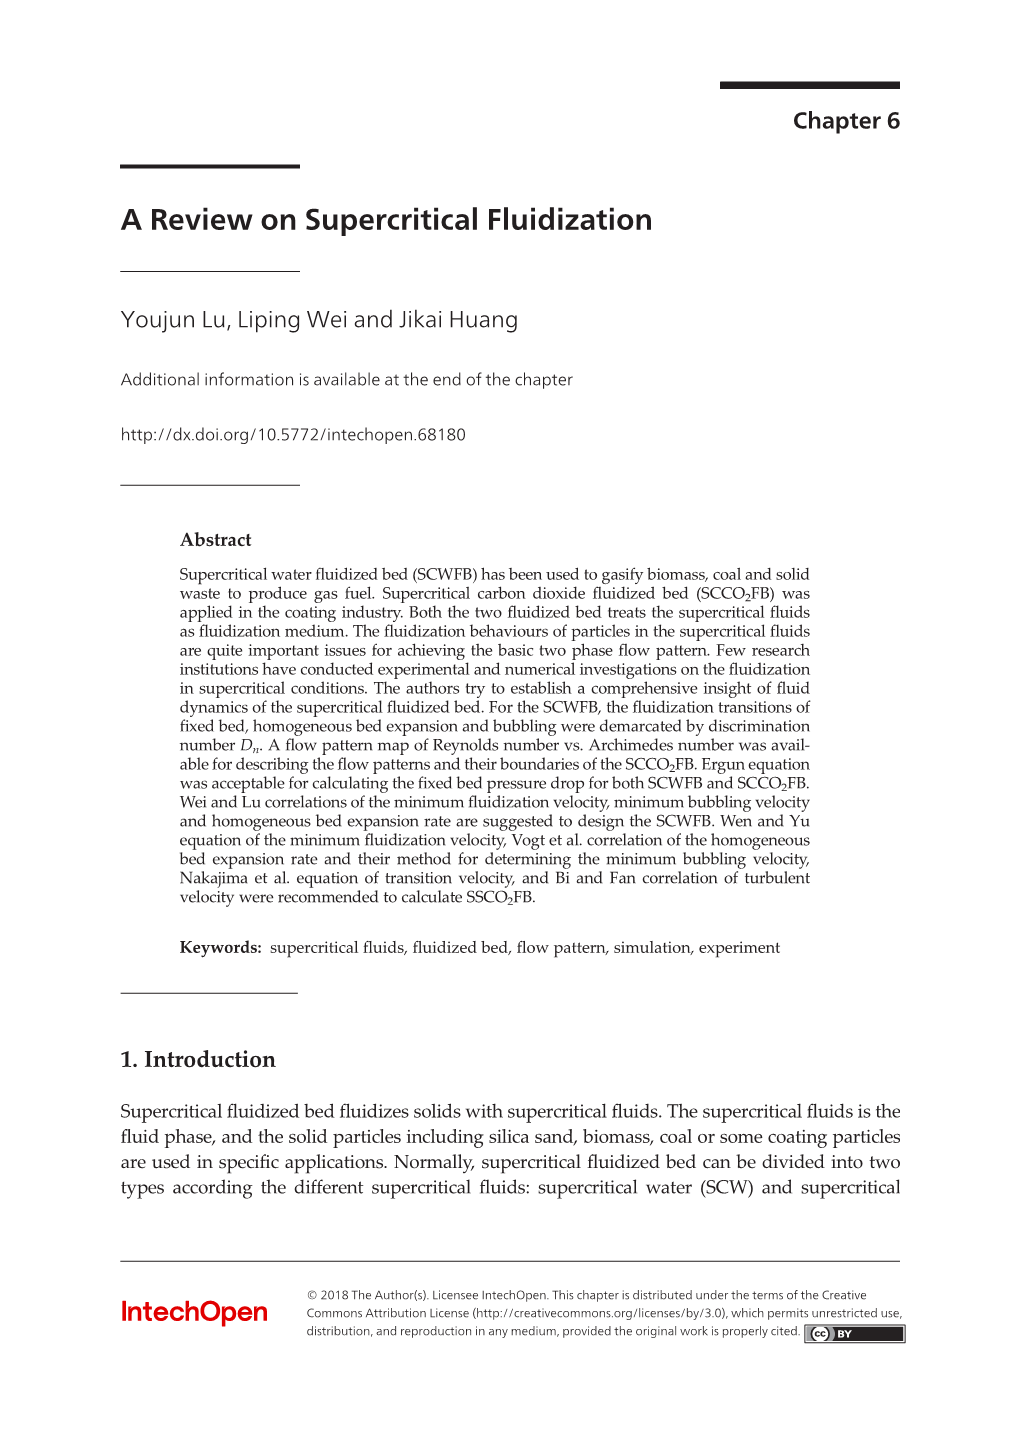 A Review on Supercritical Fluidization a Review on Supercritical Fluidization Youjun Lu, Liping Wei and Jikai Huang